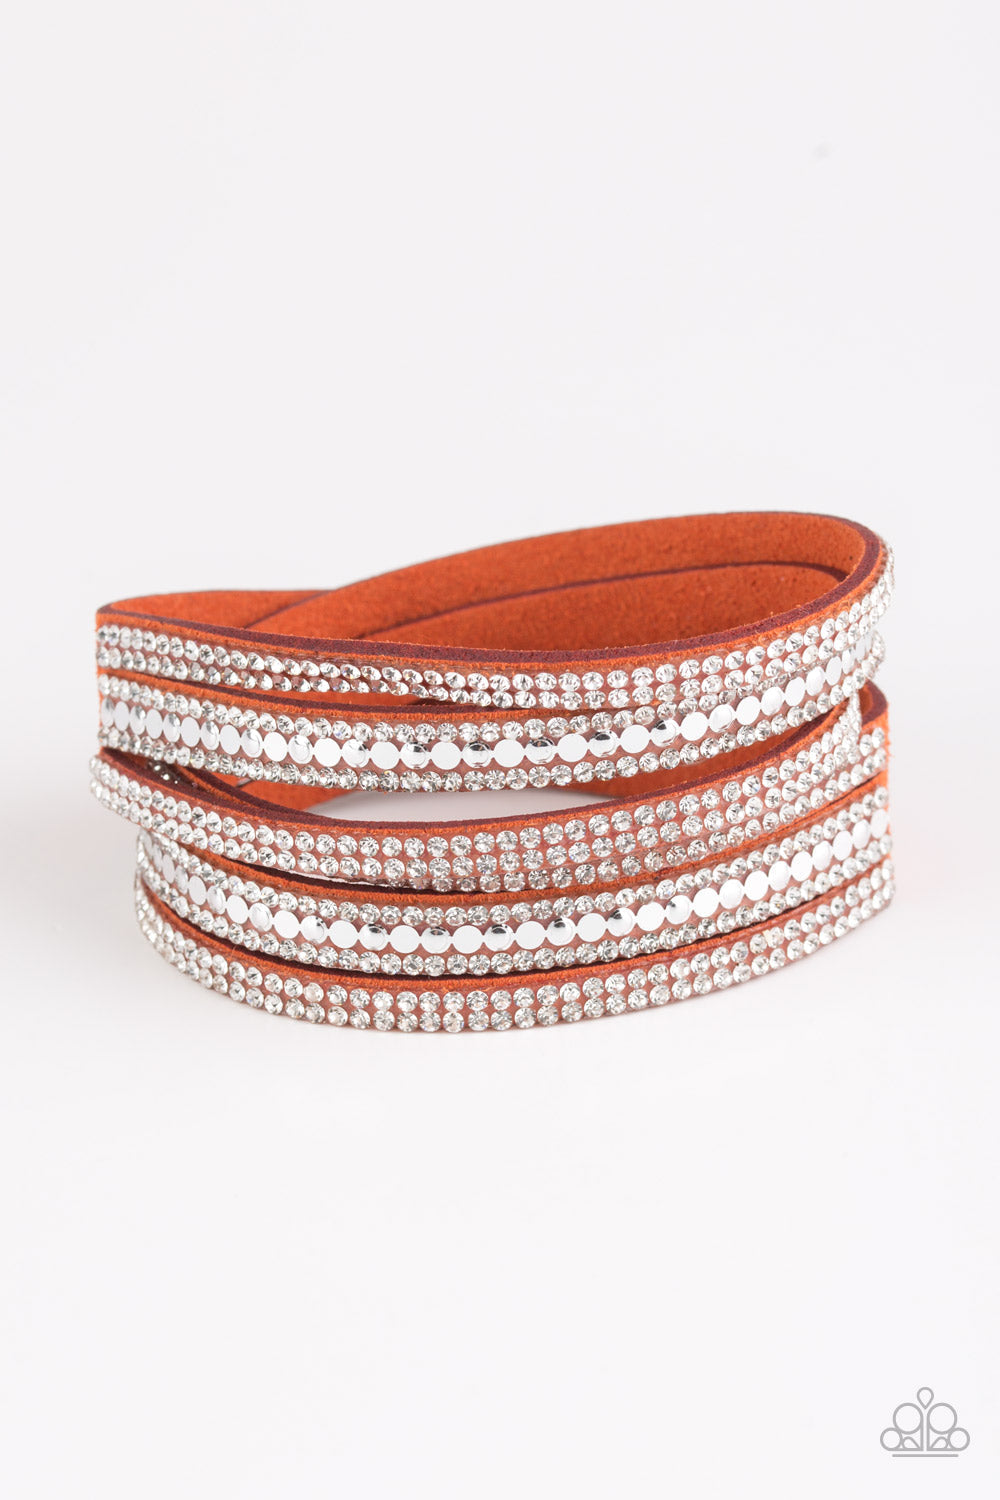 Rock Star Attitude - Orange Suede Wrap - Snap Closure Bracelet - Paparazzi Accessories - Encrusted in rows of glassy white rhinestones and flat silver studs, three strands of Burnt Orange suede wrap around the wrist for a sassy look. The elongated band allows for a trendy double wrap around the wrist. Features an adjustable snap closure. Sold as one individual bracelet.